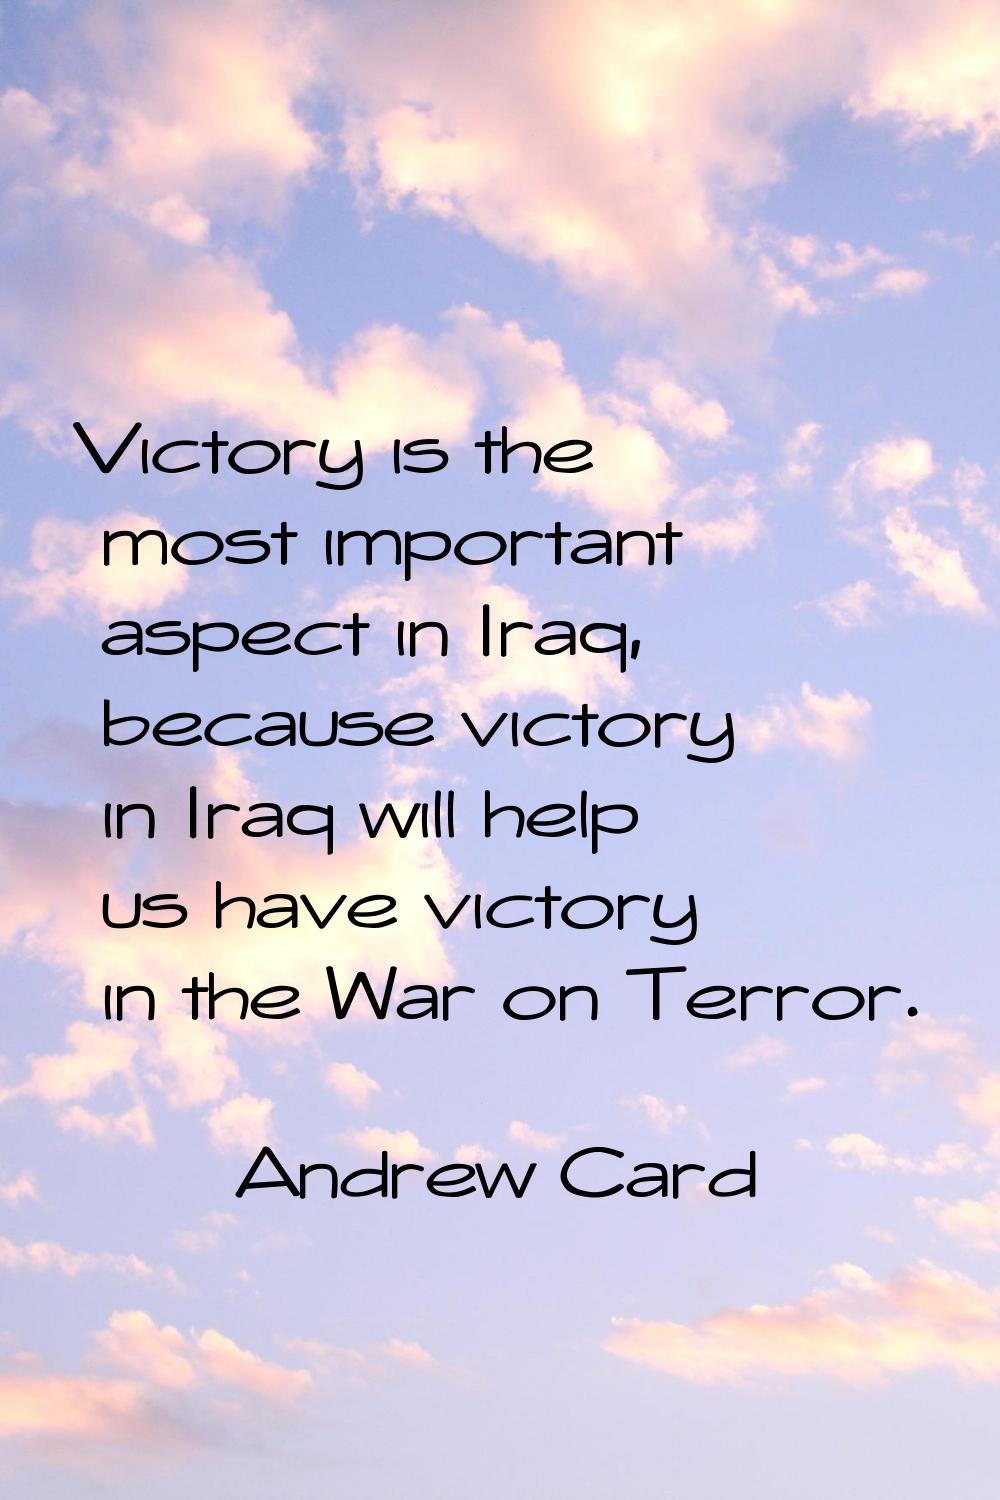 Victory is the most important aspect in Iraq, because victory in Iraq will help us have victory in 